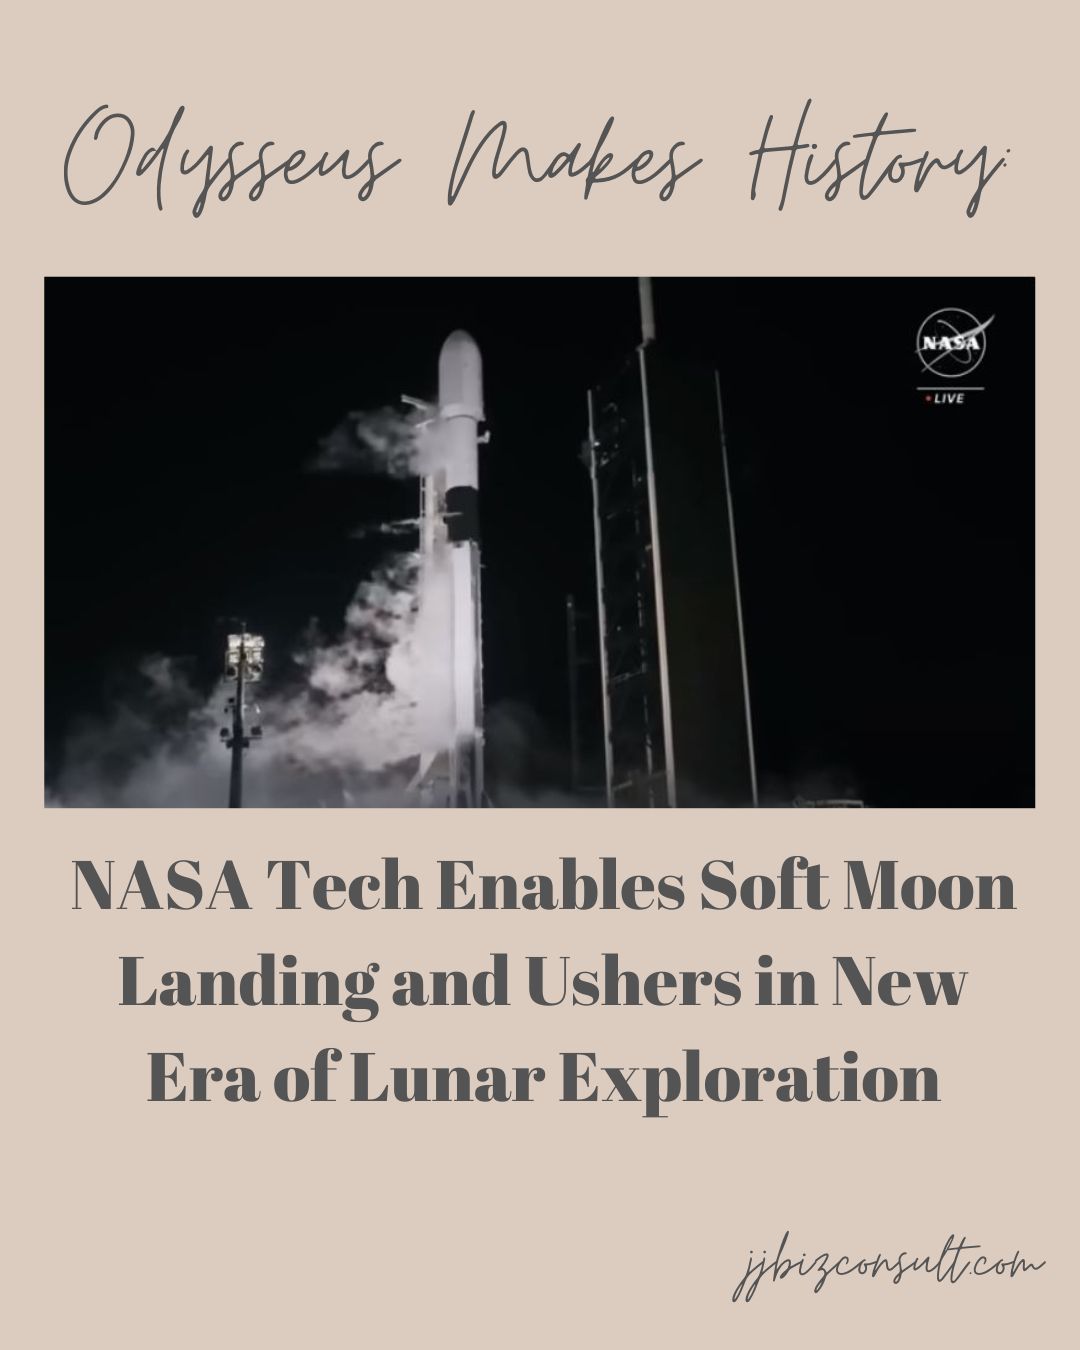 Odysseus Makes History: NASA Tech Enables Soft Moon Landing and Ushers in New Era of Lunar Exploration